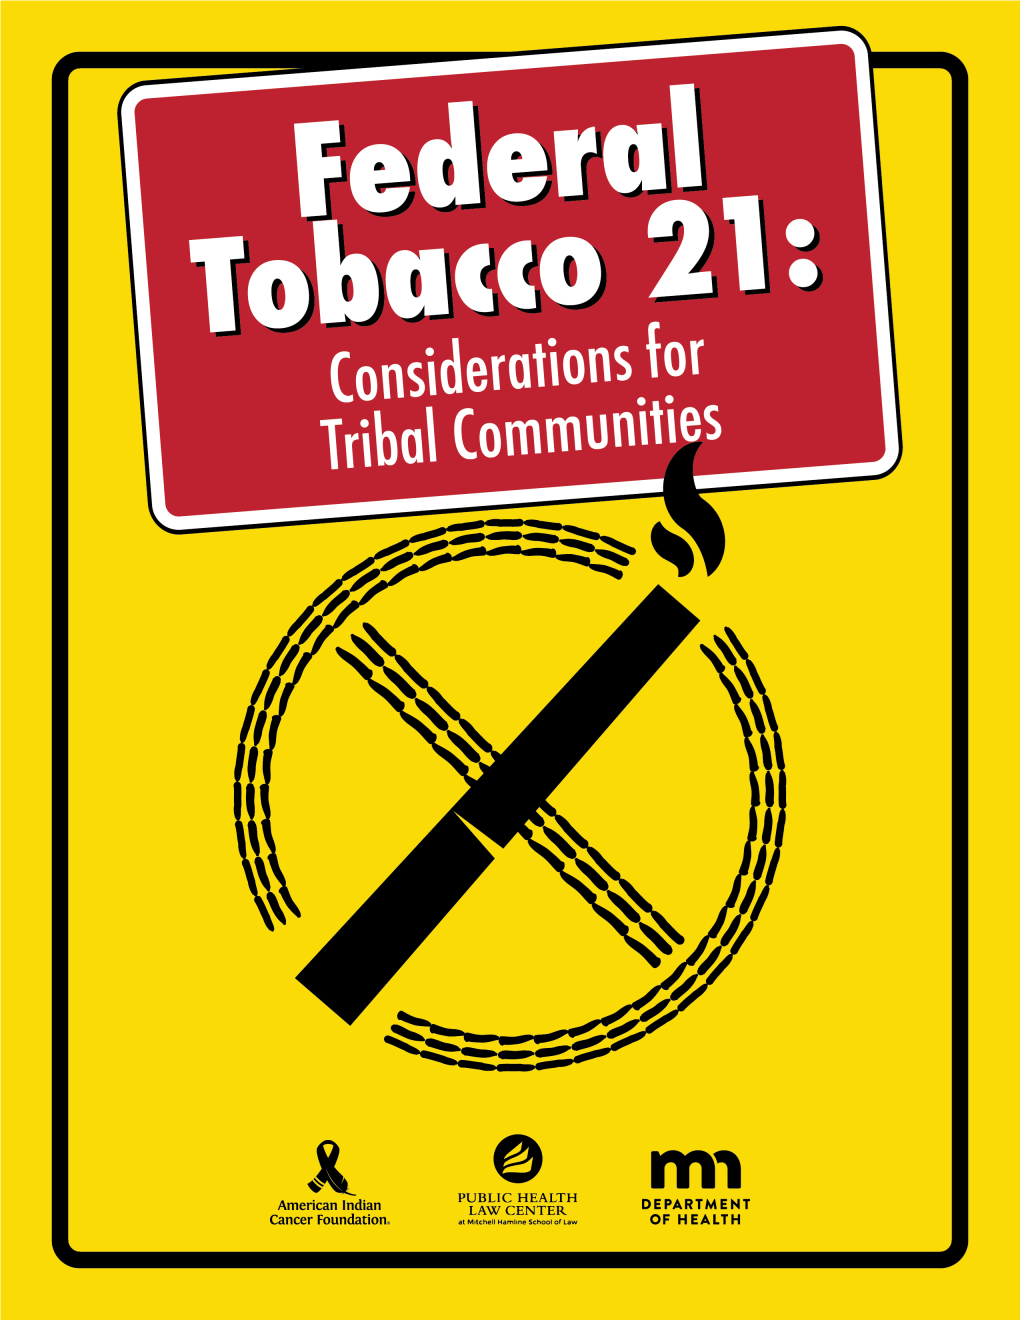 FEDERAL TOBACCO 21: Considerations for Tribal Communities